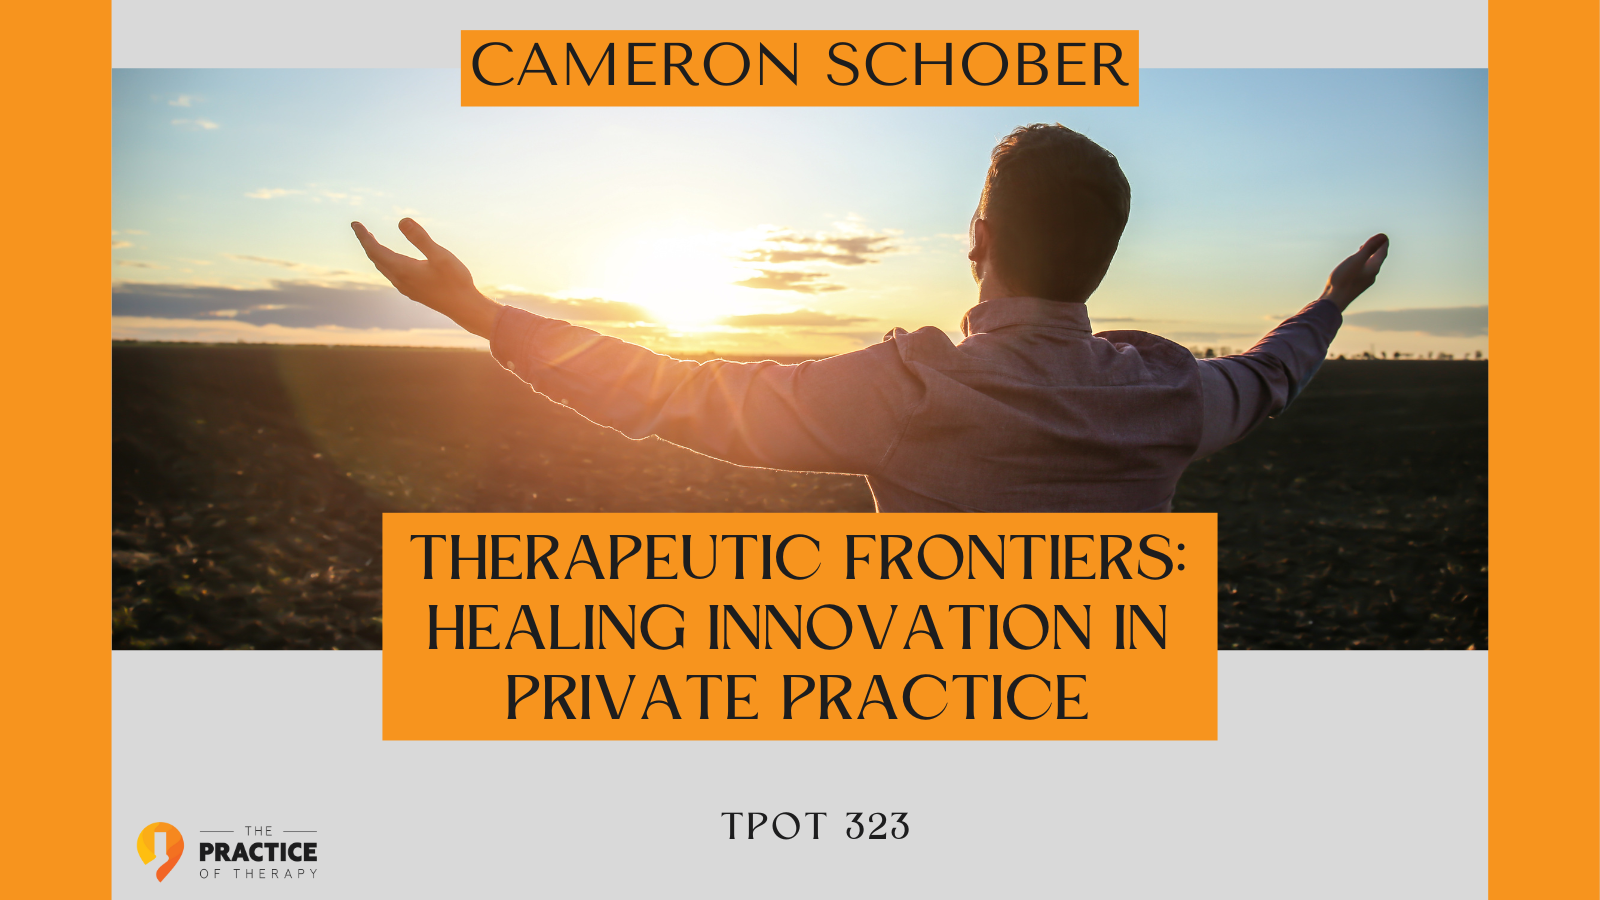 Cameron Schober Therapeutic Frontiers Healing Innovation in Private Practice TPOT 323